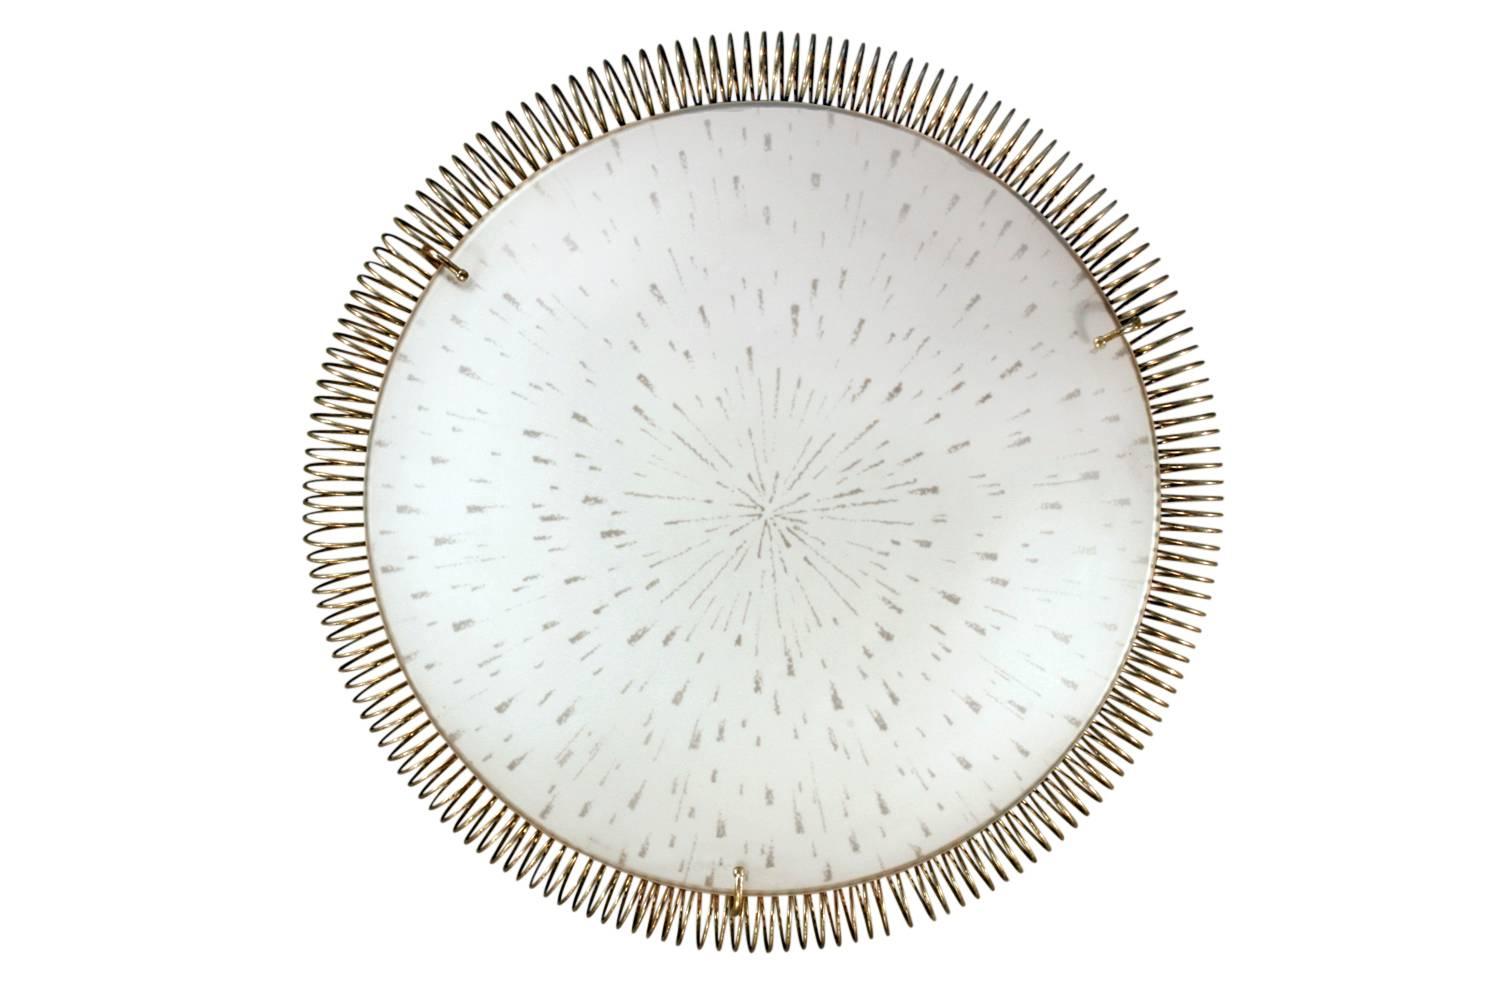 Ceiling mount fixture in brass with white textured glass shade by Gerald Thurston for Lightolier, American, 1960s.